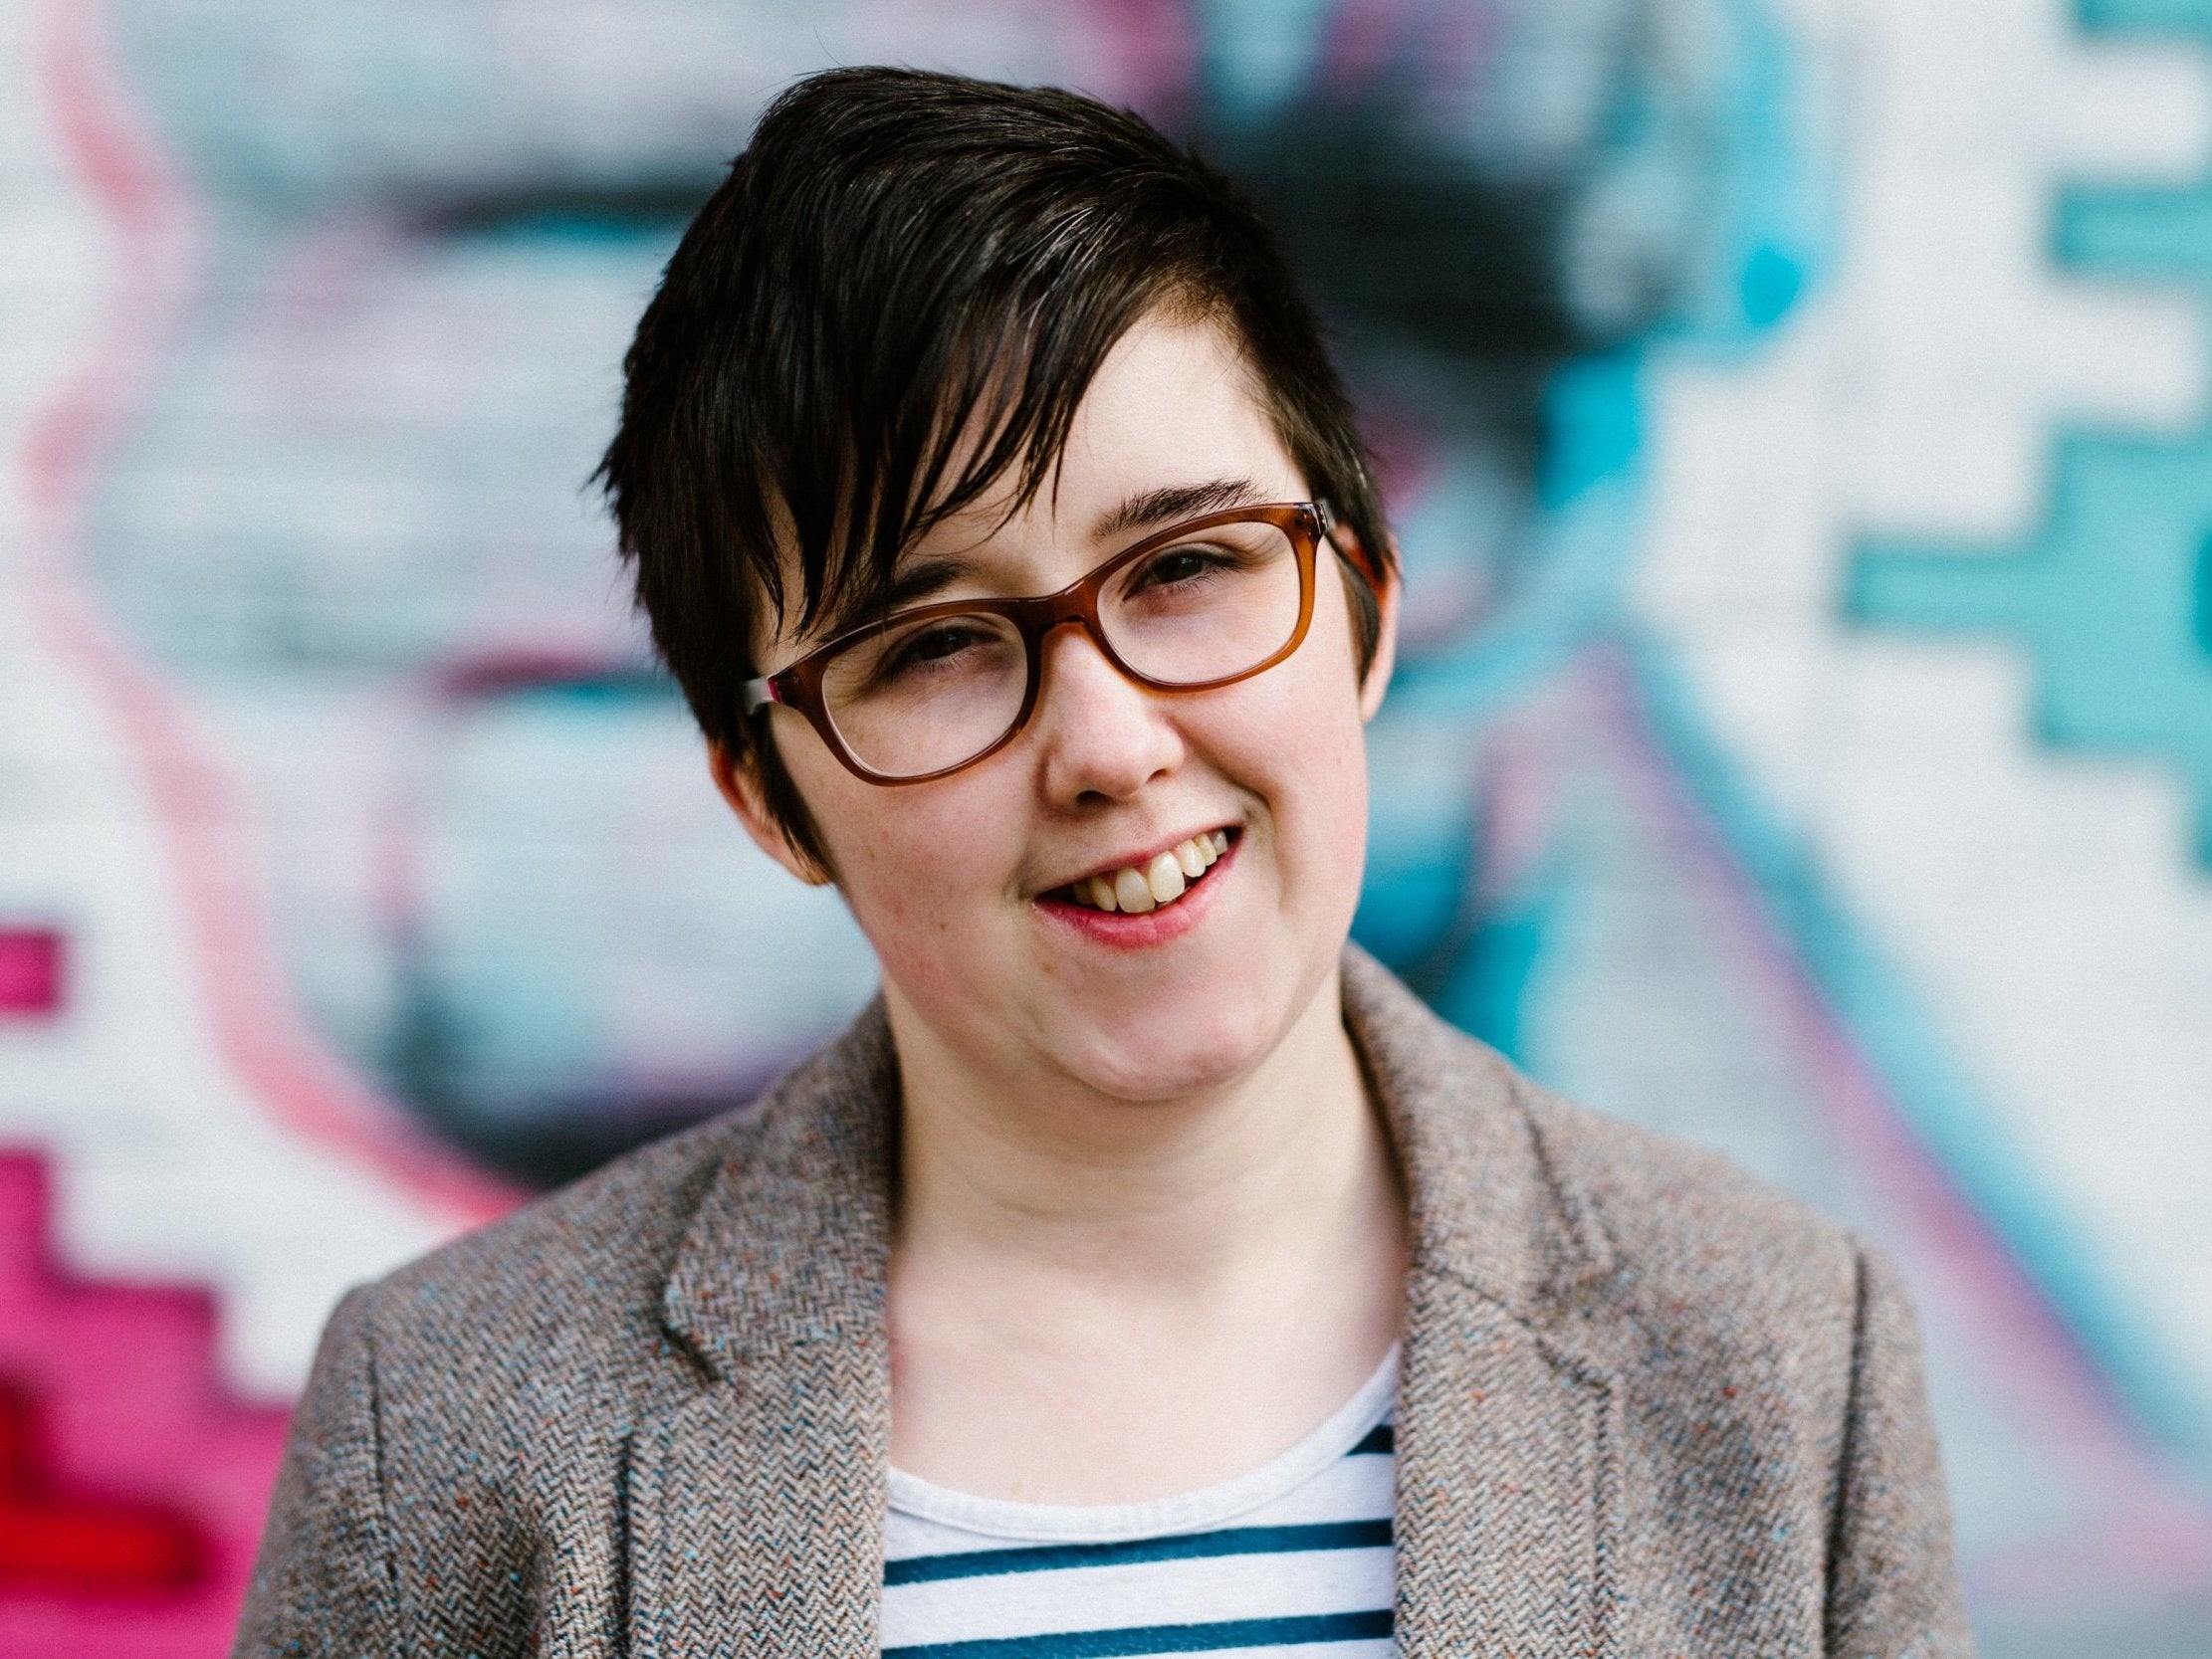 Lyra McKee was seen as a rising star in investigative journalism